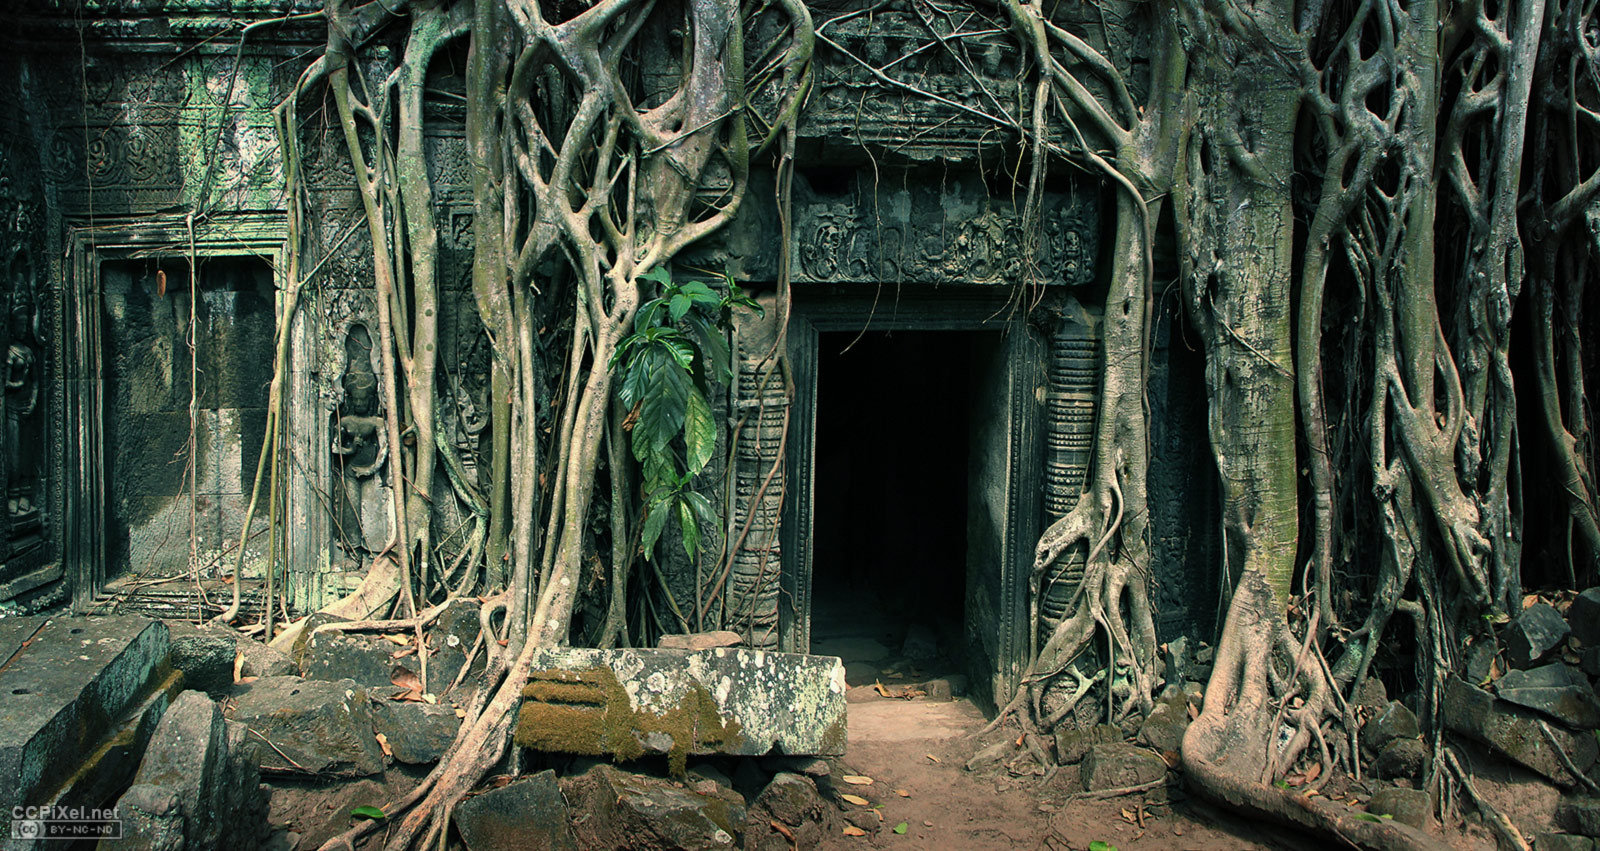 Tree rooted at Taprohm temple